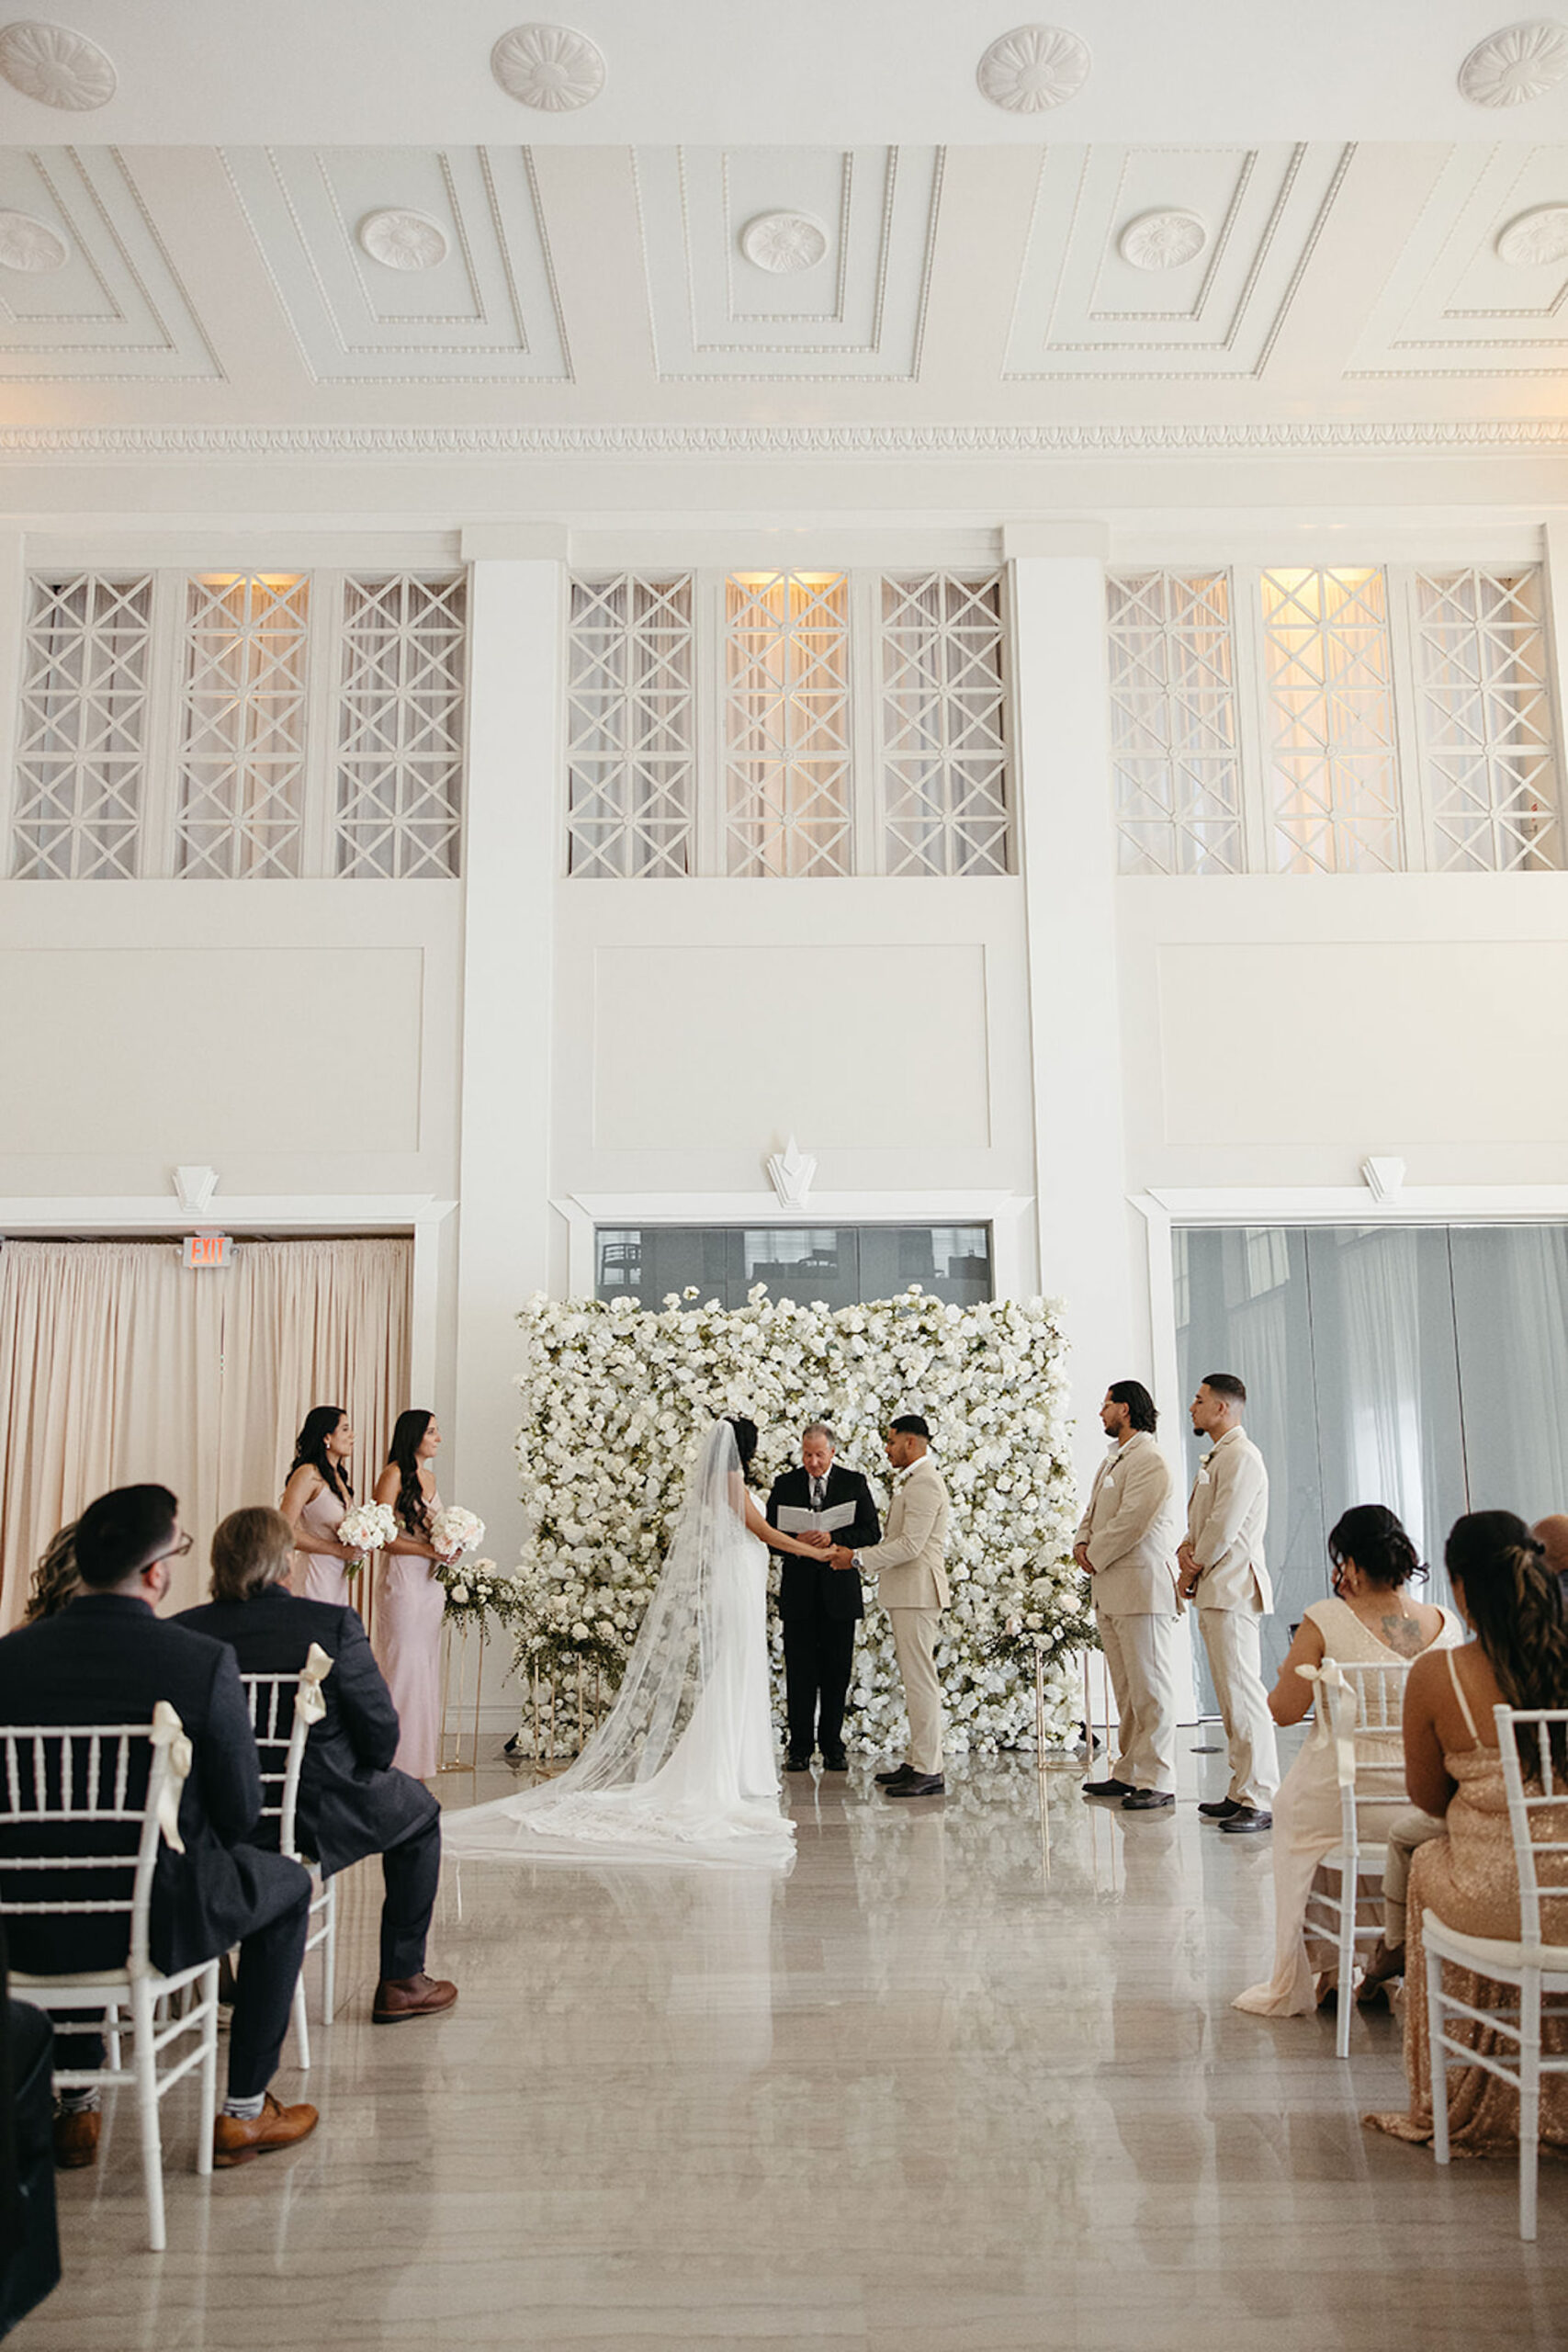 White Flower Ceremony Backdrop Wall Wedding Altar Ideas | Downtown Tampa Venue The Vault | Planner Coastal Coordinating